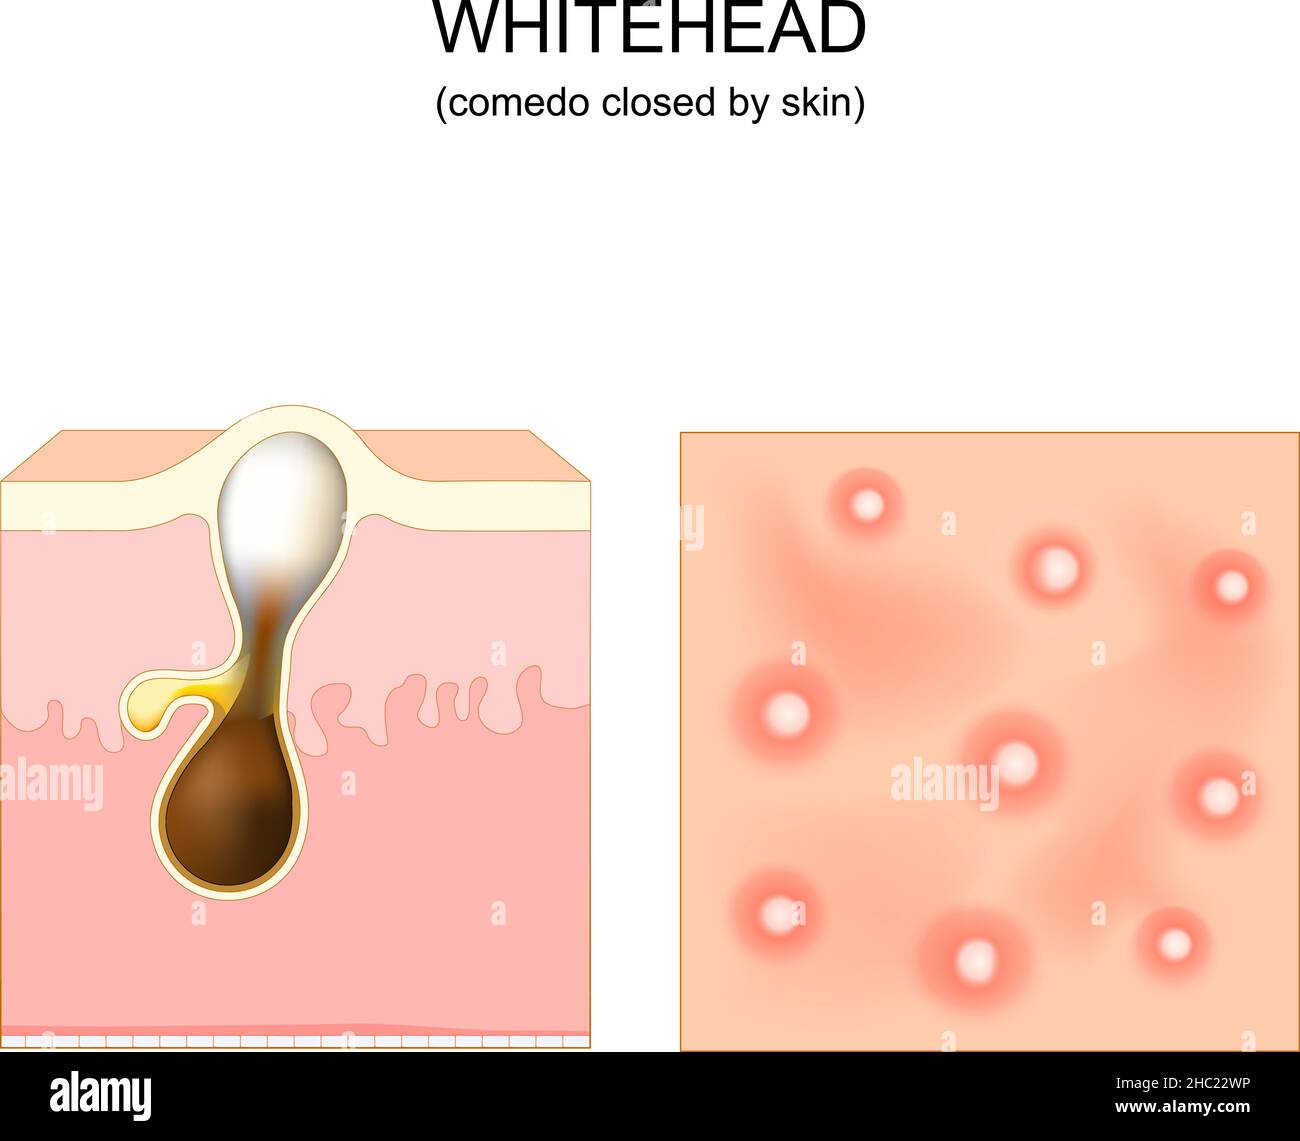 Acne. whitehead. clogged pore and comedo. Cross-section of a human skin with Hair follicle. Top view of the skin with pimples. Vector Stock Vector